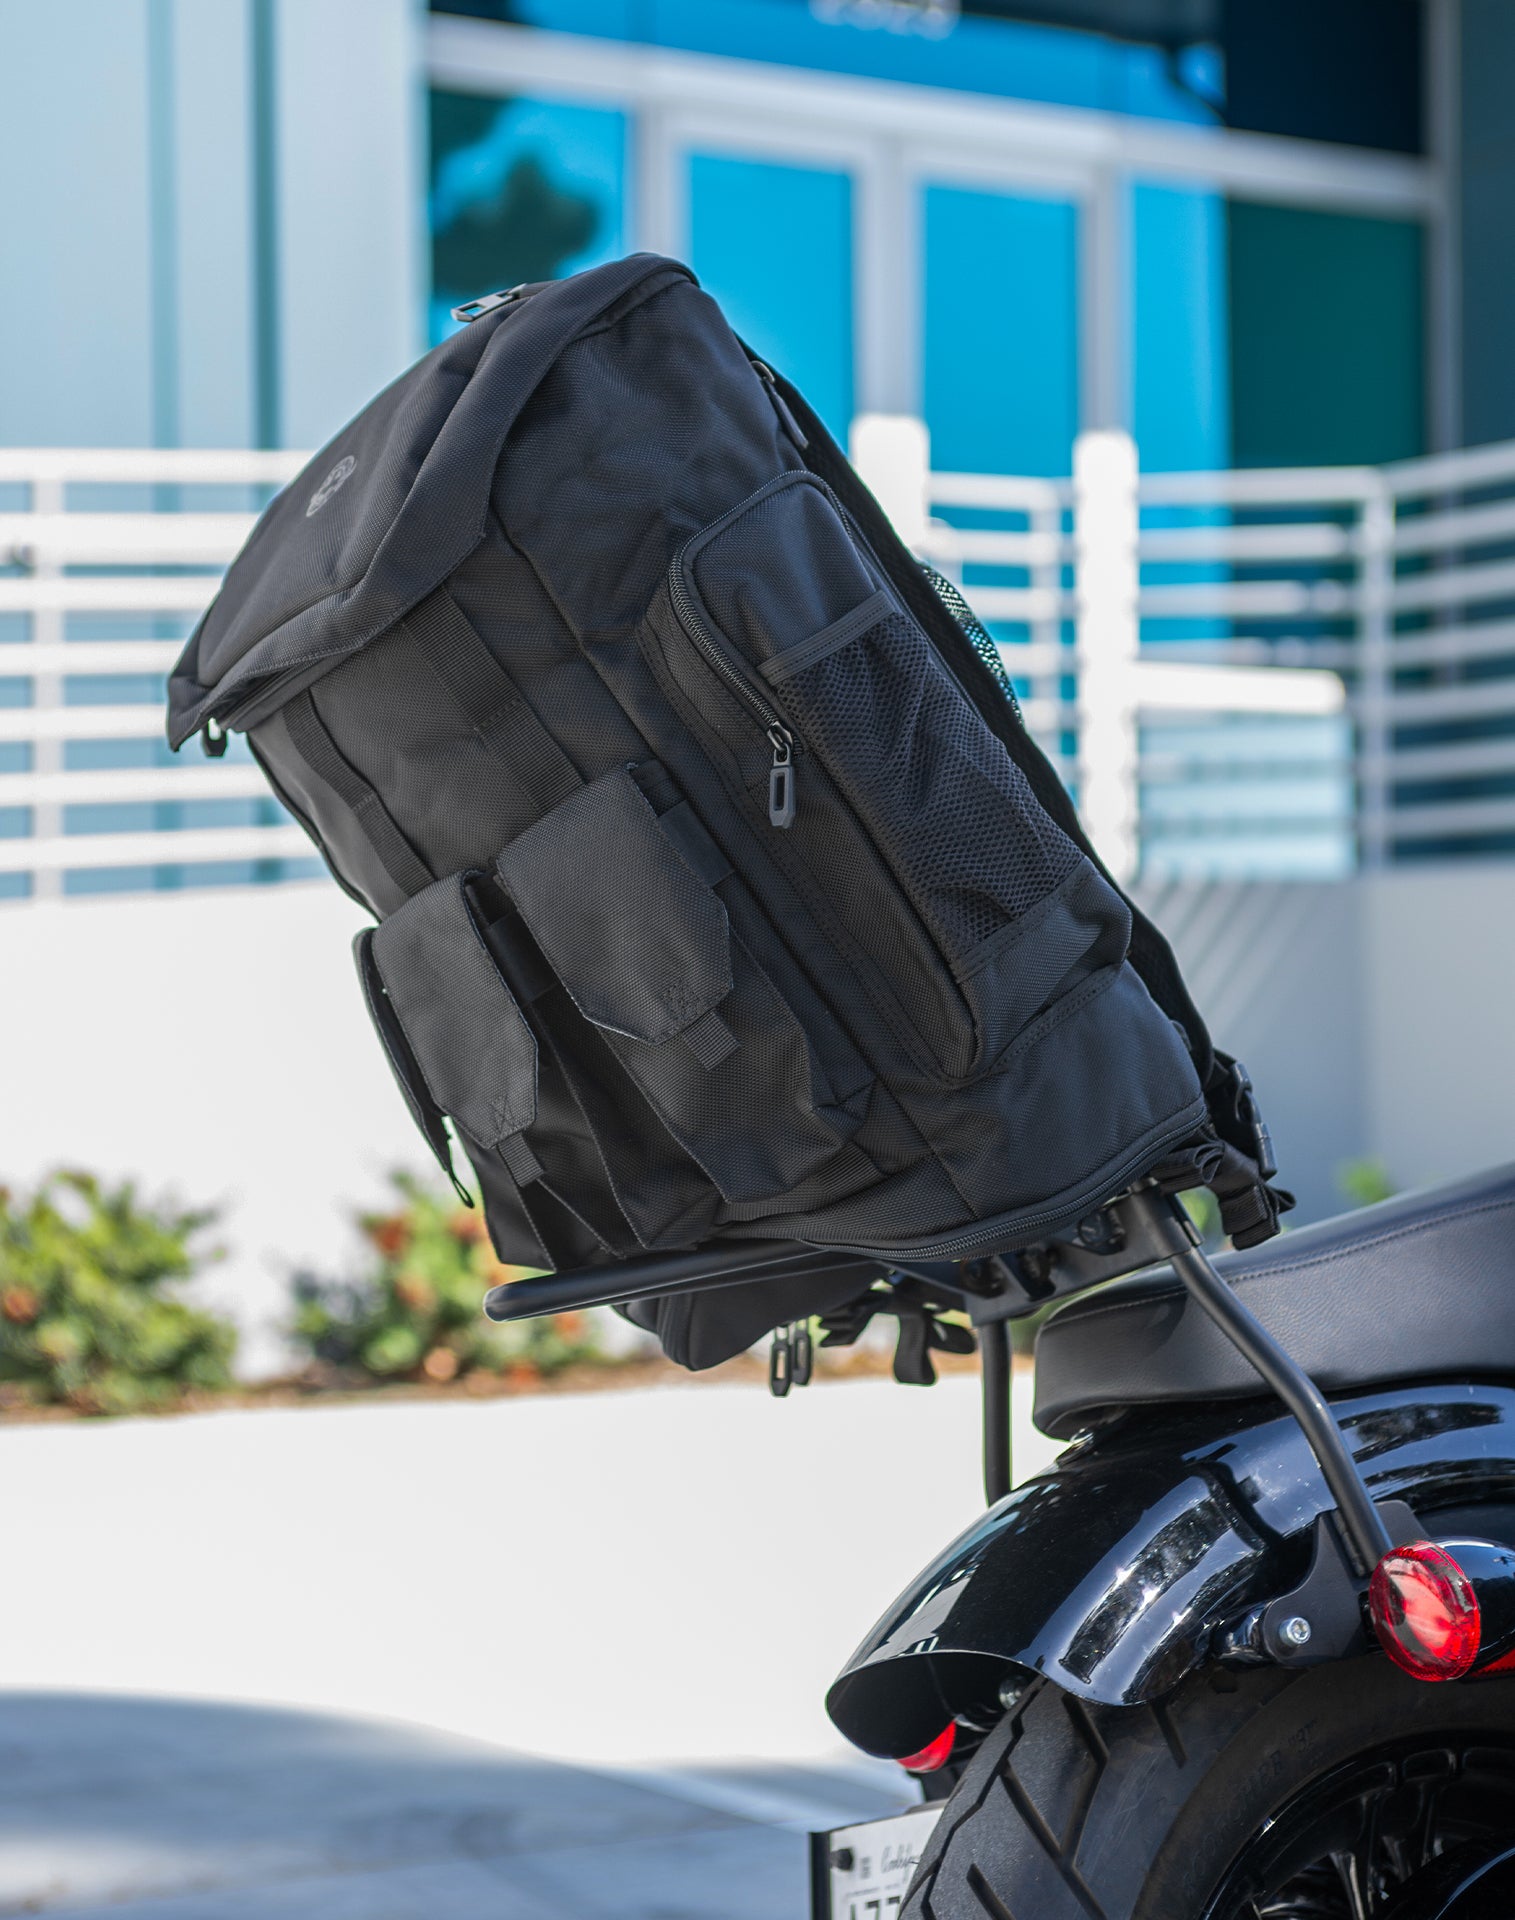 32L - Trident Large Honda Motorcycle Backpack